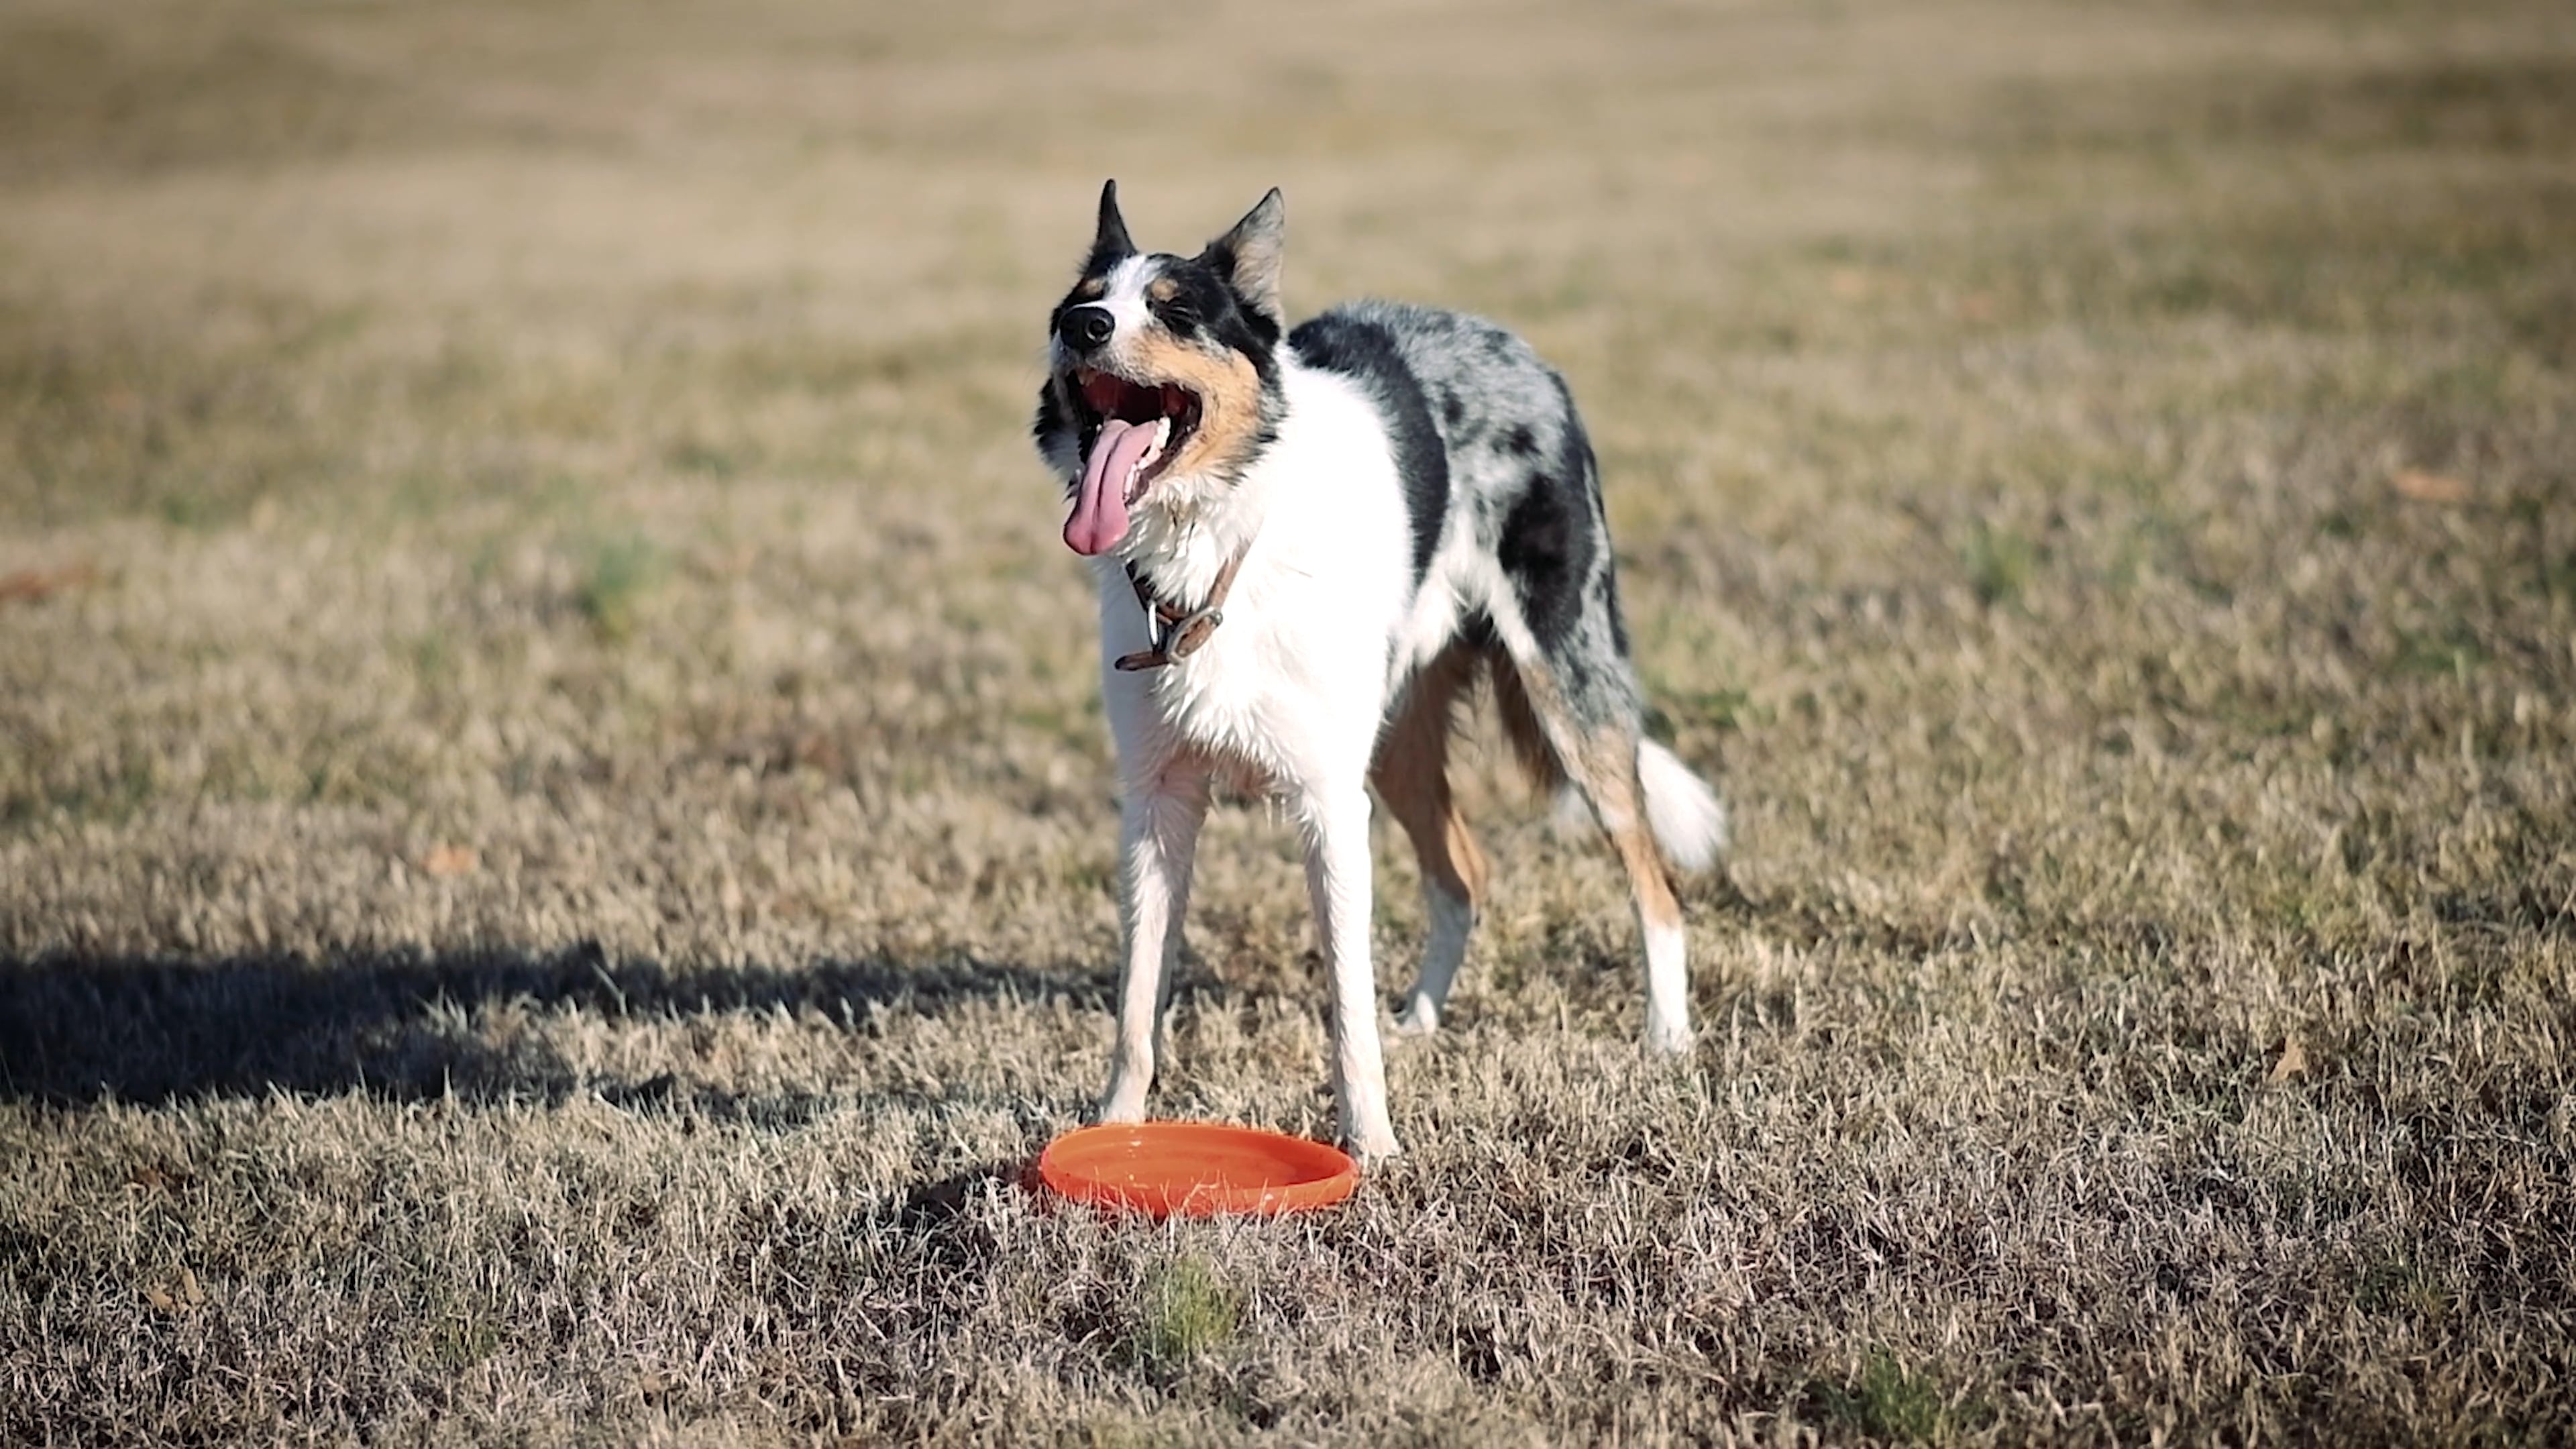 Flying Disc Sports: Dog Playing with Frisbee, Companion Dog, Ultimate Frisbee, Outdoor Games. 3840x2160 4K Background.